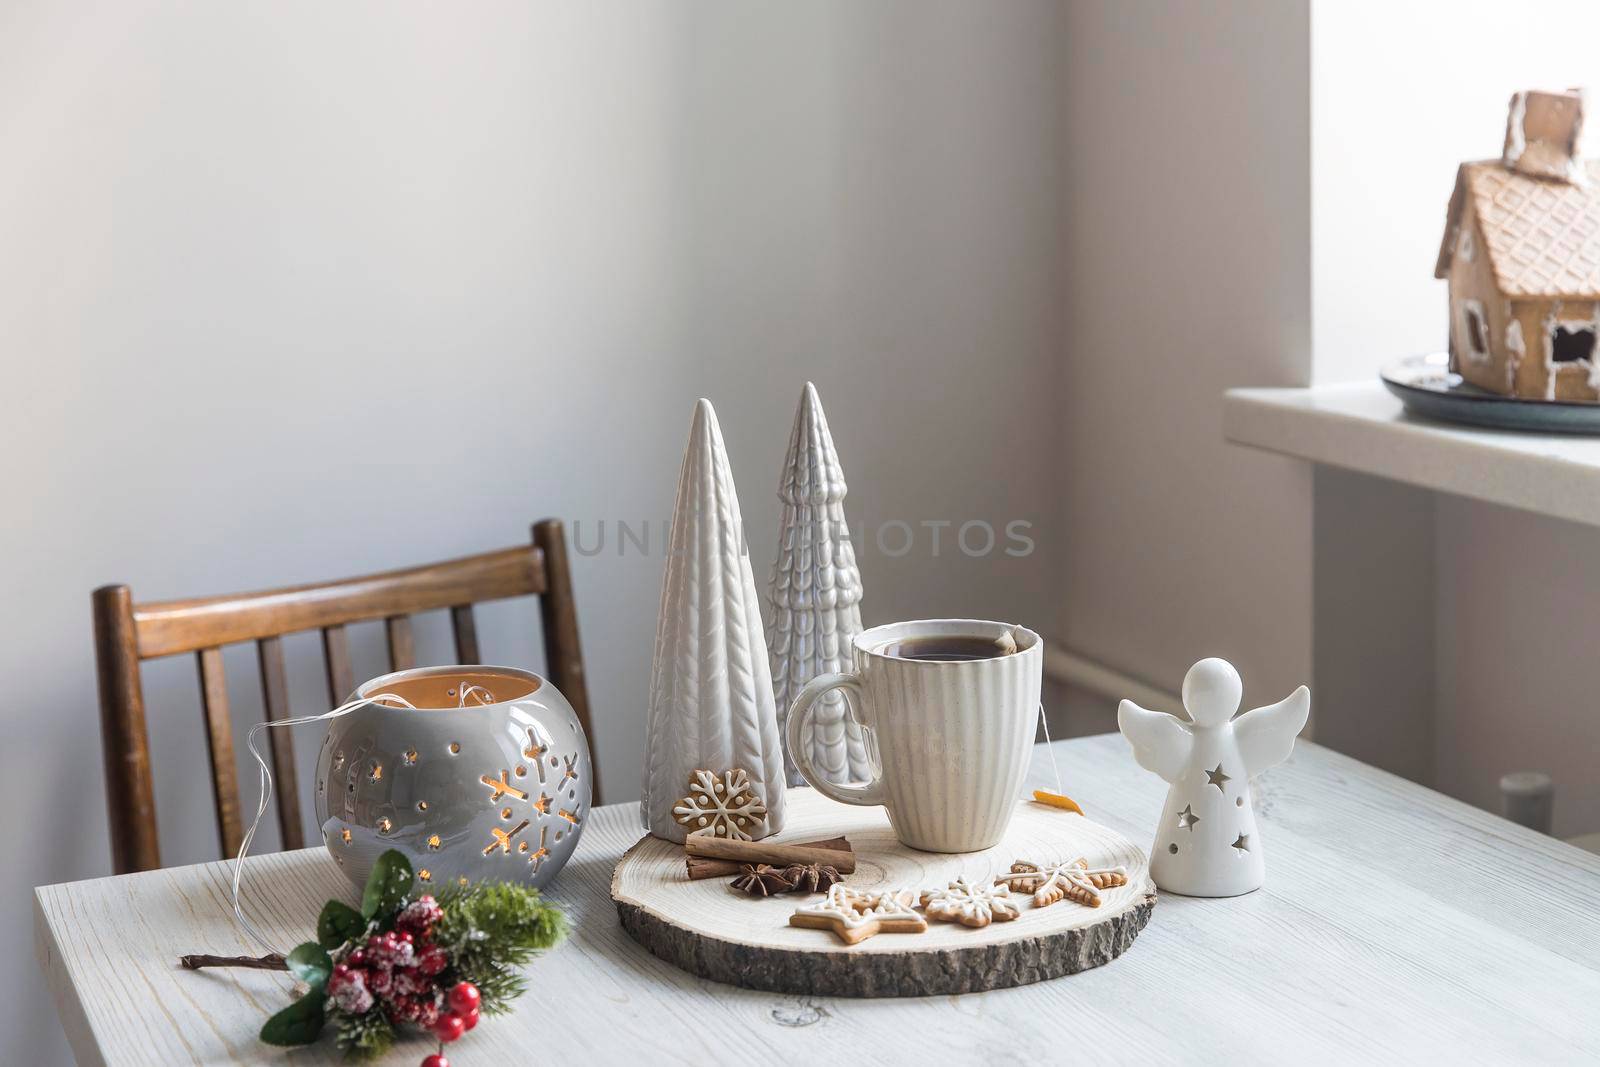 A cup of coffee on a wooden stand, ceramic Christmas trees in pastel colors, gingerbread cookies, gray candlestick. Artificial spruce branch with red berries. Scandinavian style. Copy space.